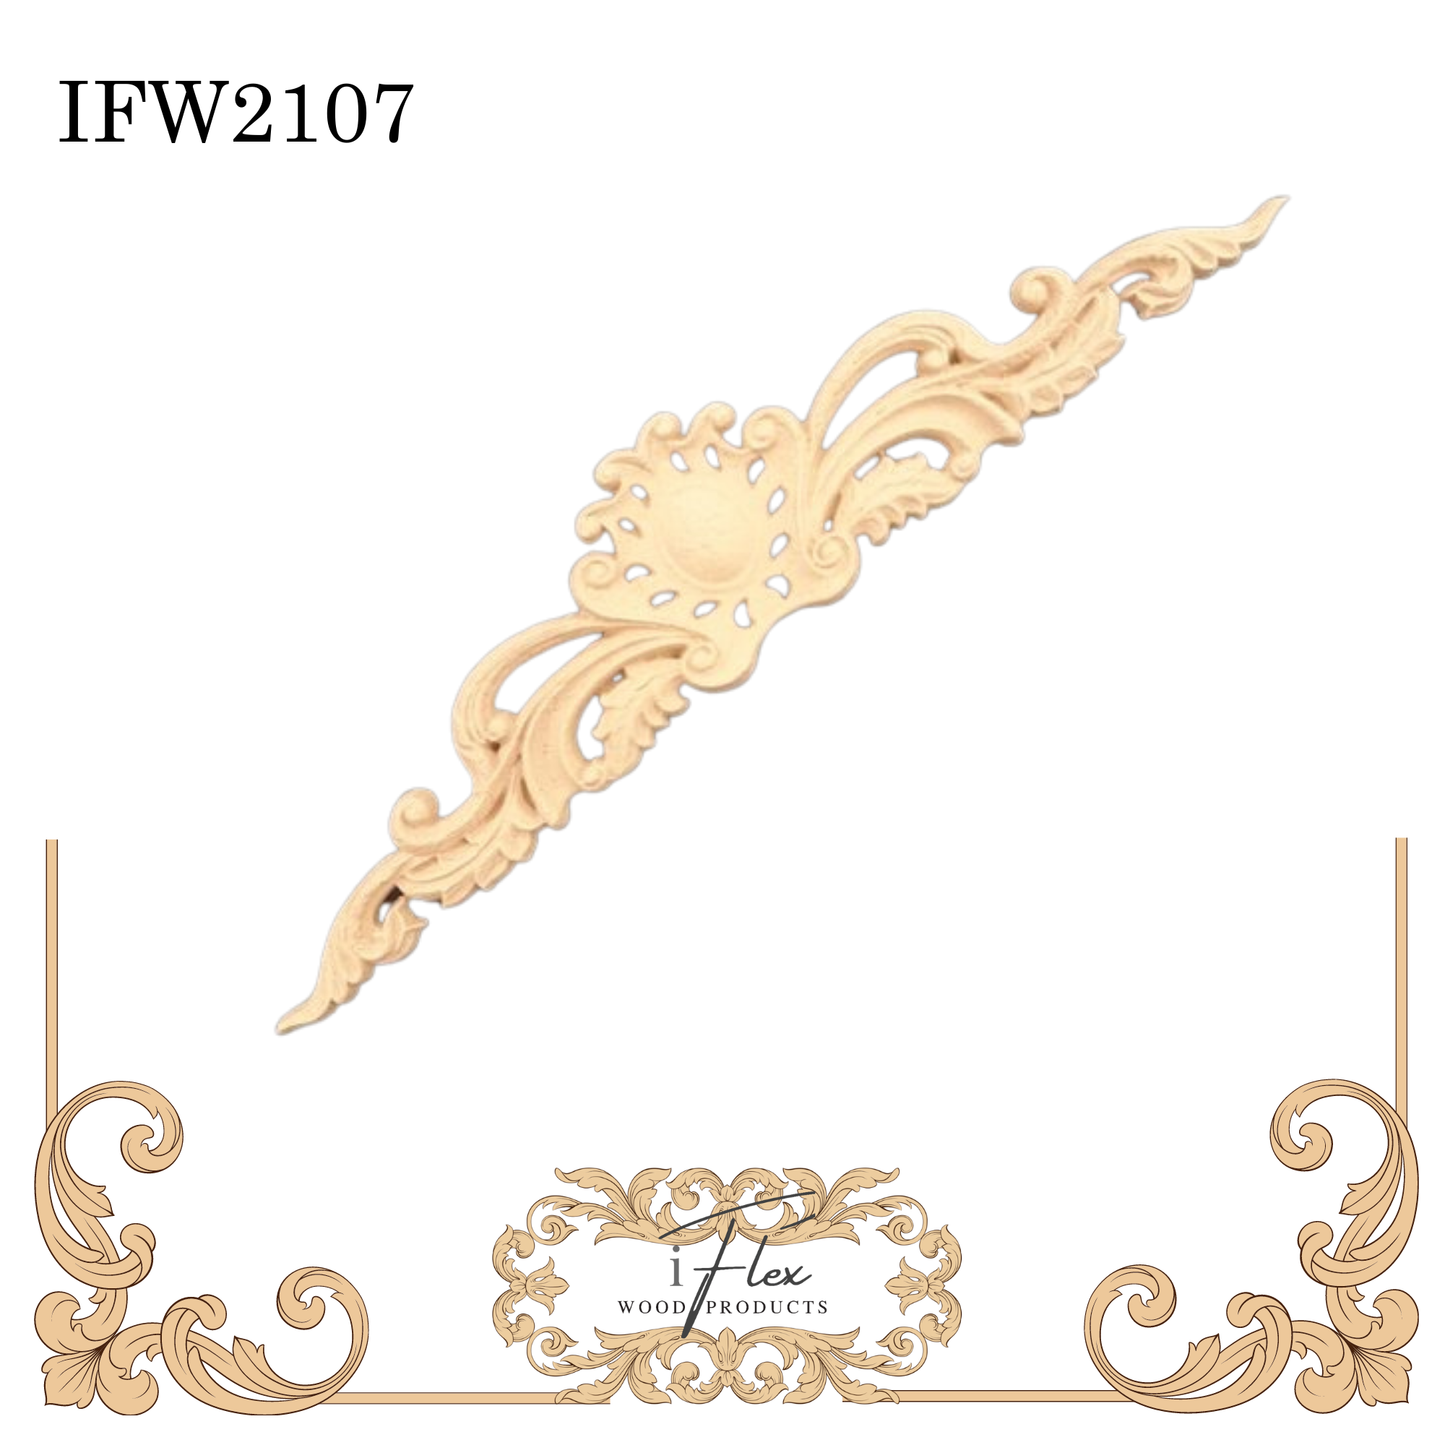 IFW 2107 iFlex Wood Products, bendable mouldings, flexible, wooden appliques, pediment